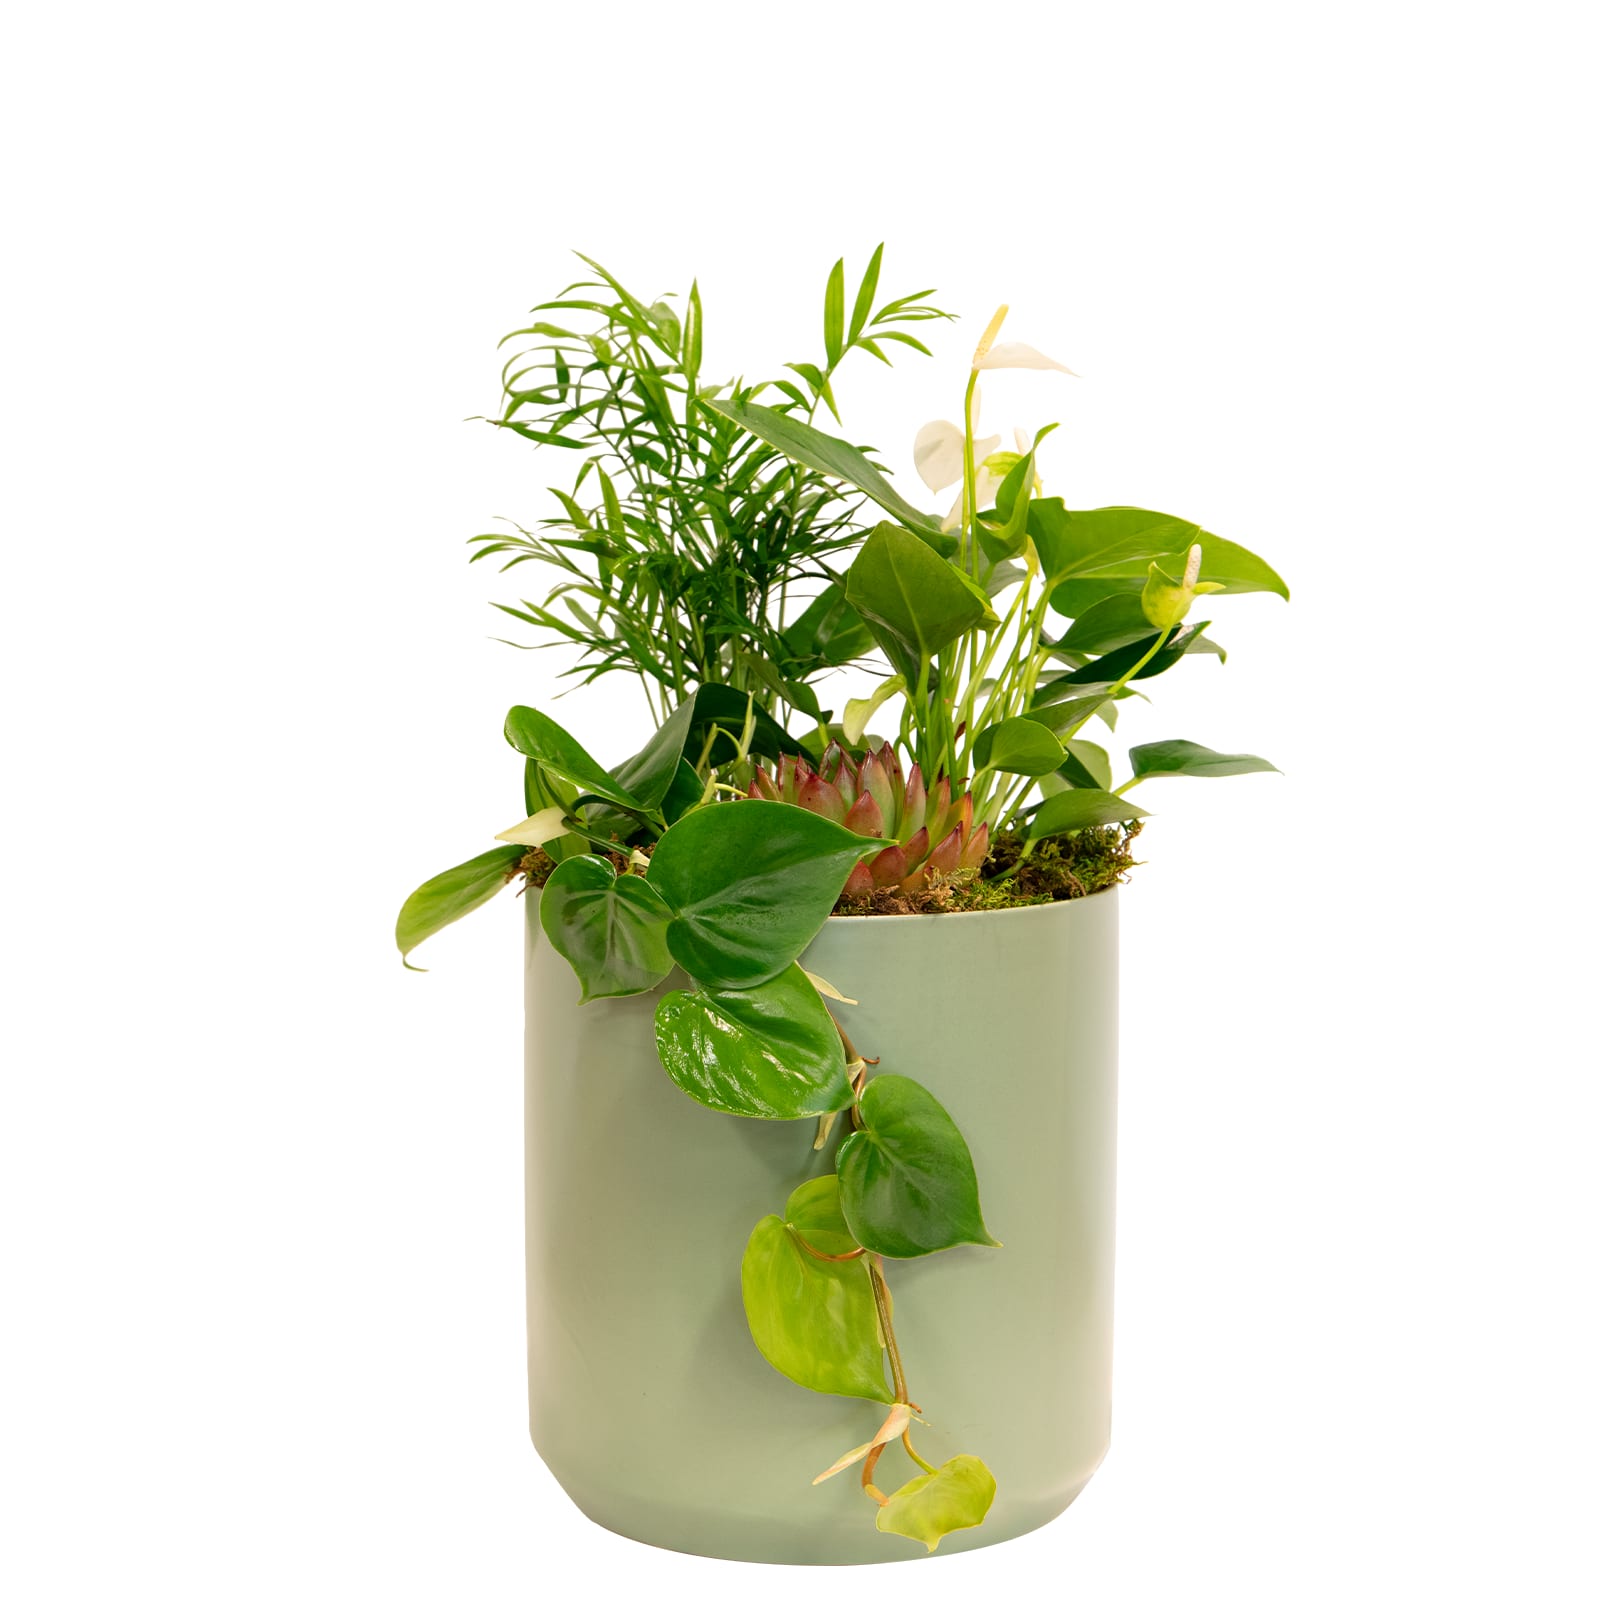 Forever Green - Want something that'll last longer than cut flowers? How about the Forever Green; a beautiful mix of house-plants! Potted in a modern ceramic container in your choice of Sage Green, Clay, or White, you'll get an array of plants that will coexist together. Perfect for offices, new business's or even for your own home, this arrangement is sure to bring green anywhere it goes!   *Plants may vary